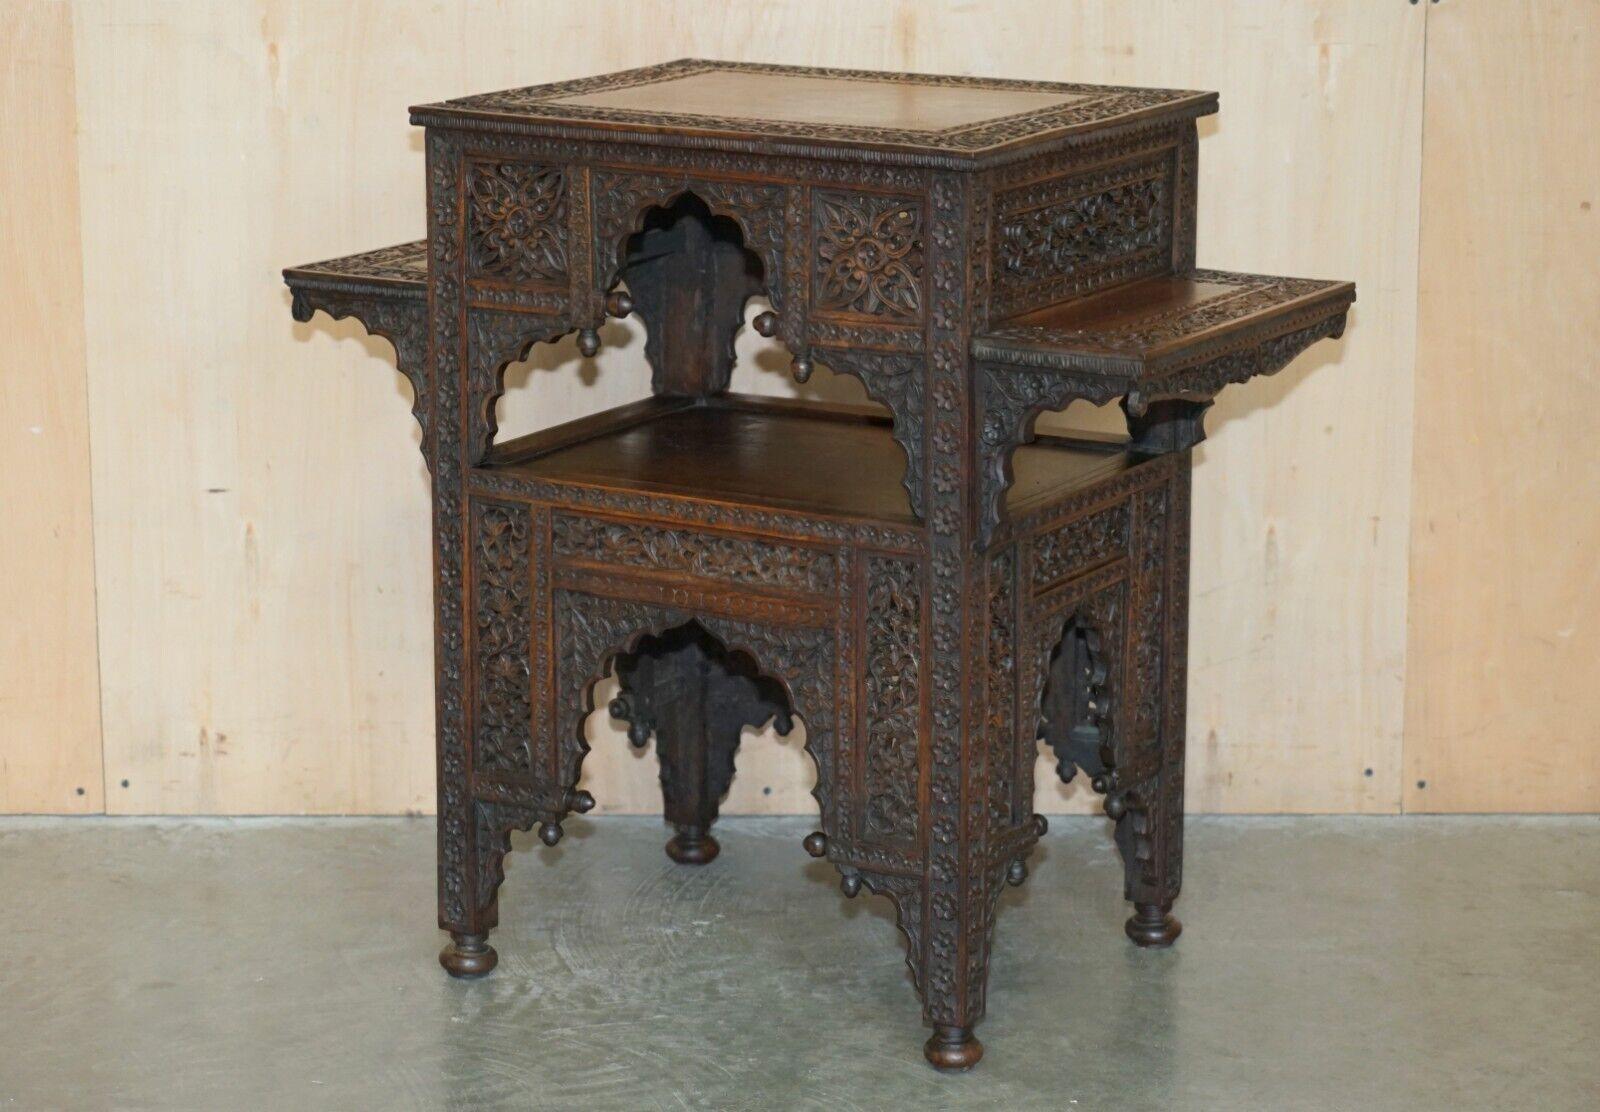 Royal House Antiques

Royal House Antiques is delighted to offer for sale this exquisite, hand carved from top to bottom, four tier Liberty's of London Moorish occasional table 

Please note the delivery fee listed is just a guide, it covers within